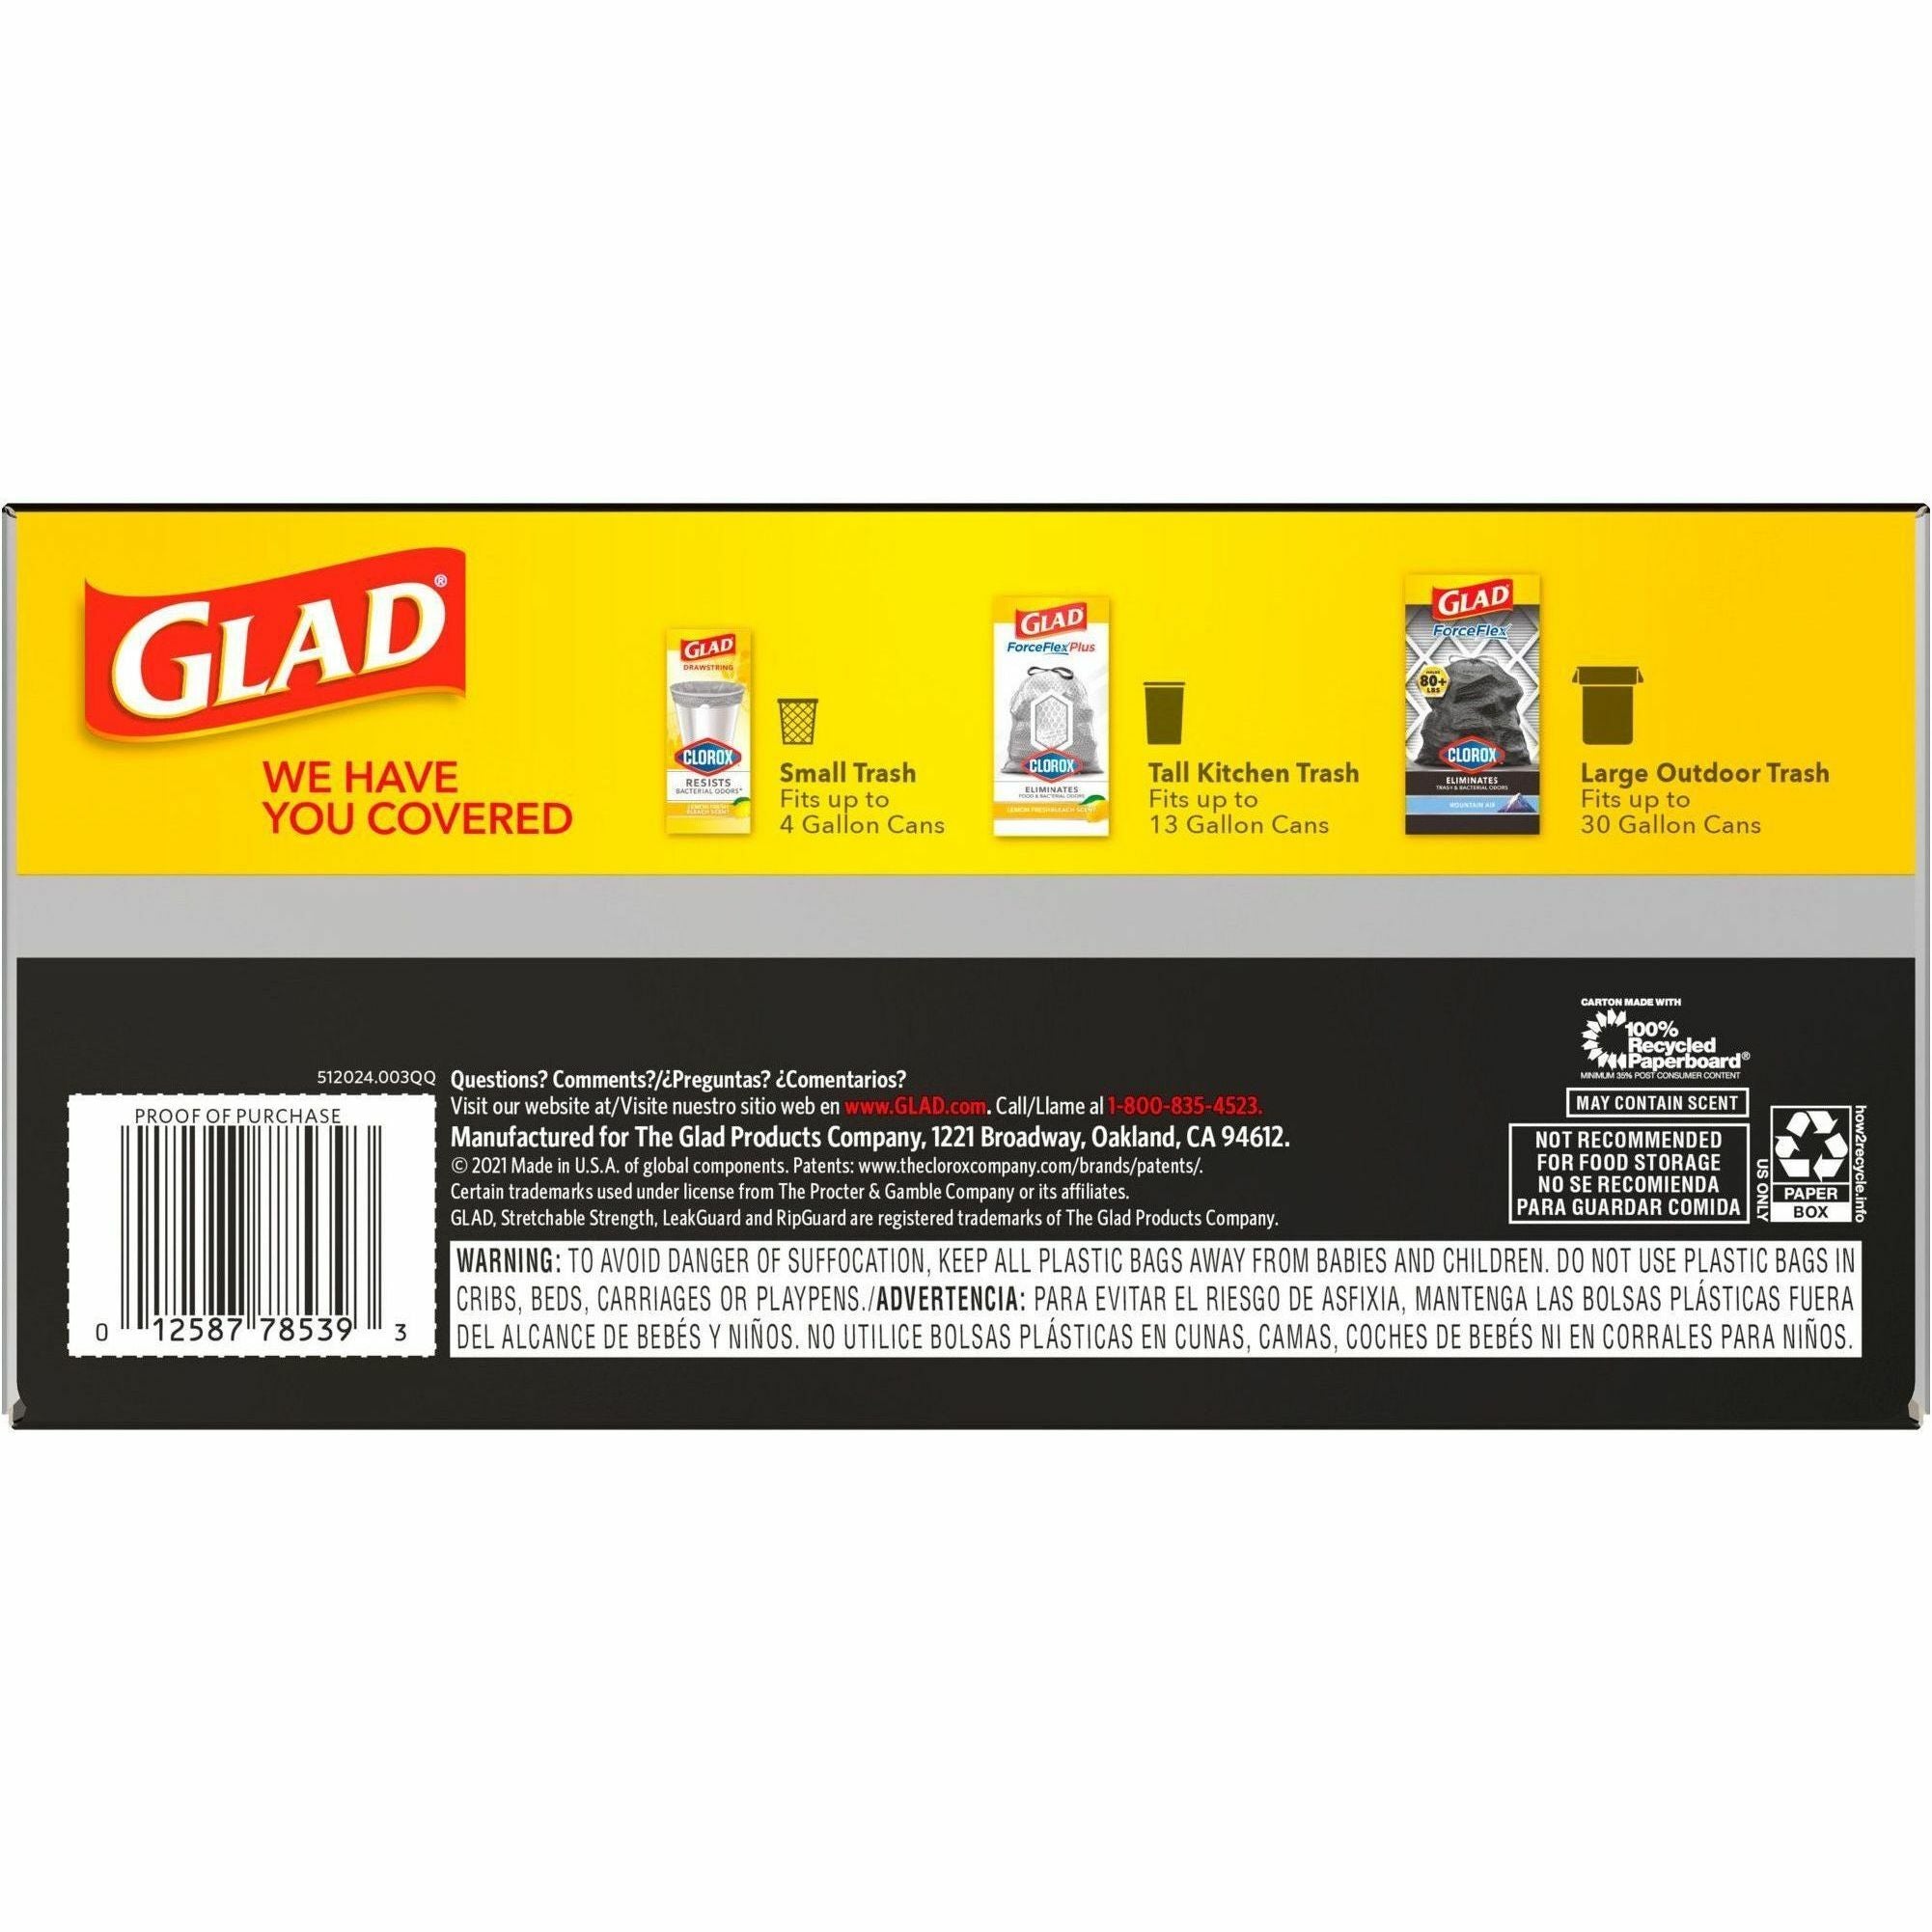 Glad ForceFlexPlus Drawstring Large Trash Bags - Large Size - 30 gal Capacity - 30" Width x 32.01" Length - 0.90 mil (23 Micron) Thickness - Drawstring Closure - Black - 1Box - 50 Per Box - Garbage, Indoor, Outdoor, Home, Office, Restaurant, Commerci - 2